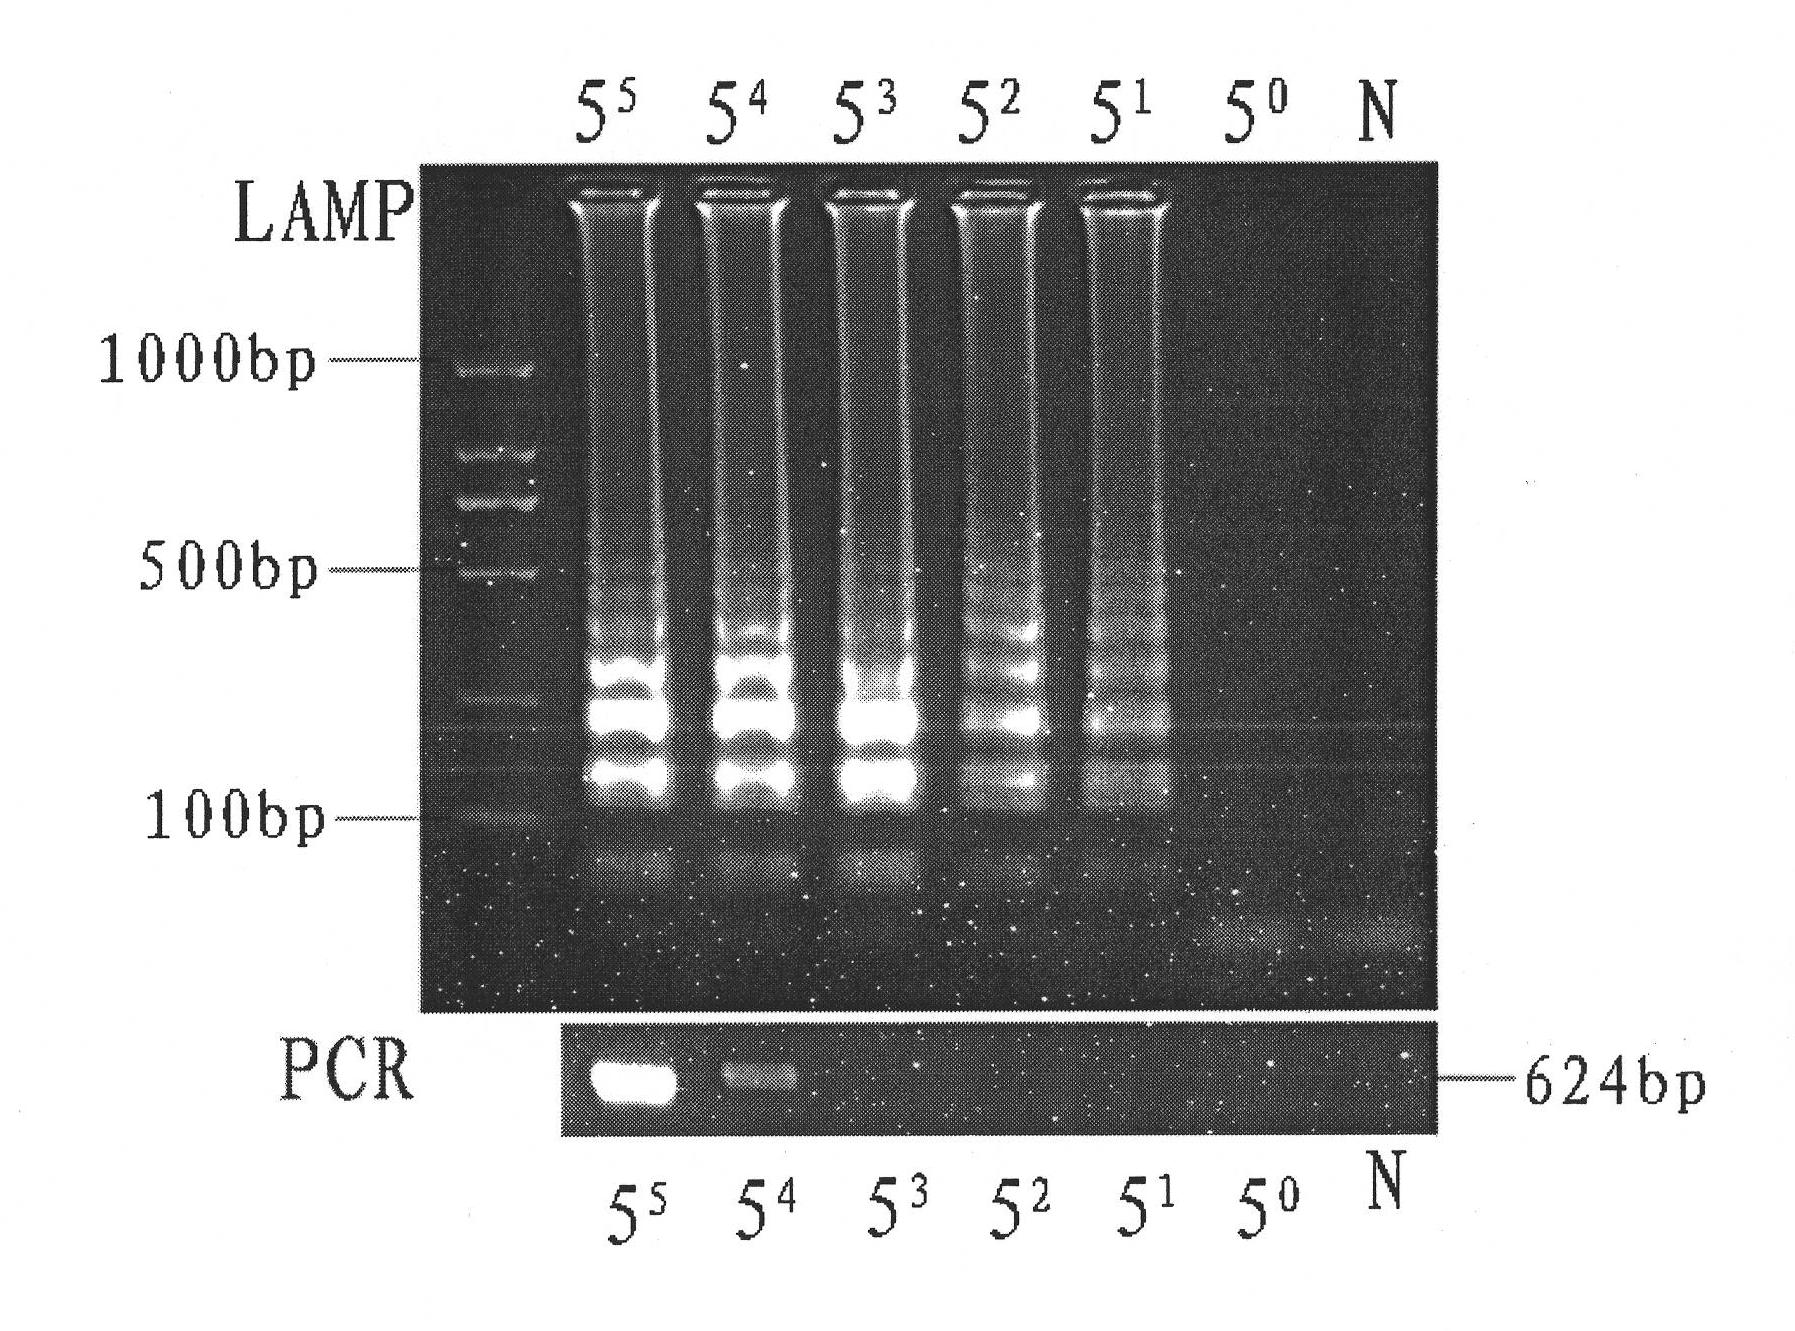 Kit and method for detecting anaplasmosis and rickettsioses based on loop-mediated isothermal amplification (LAMP)